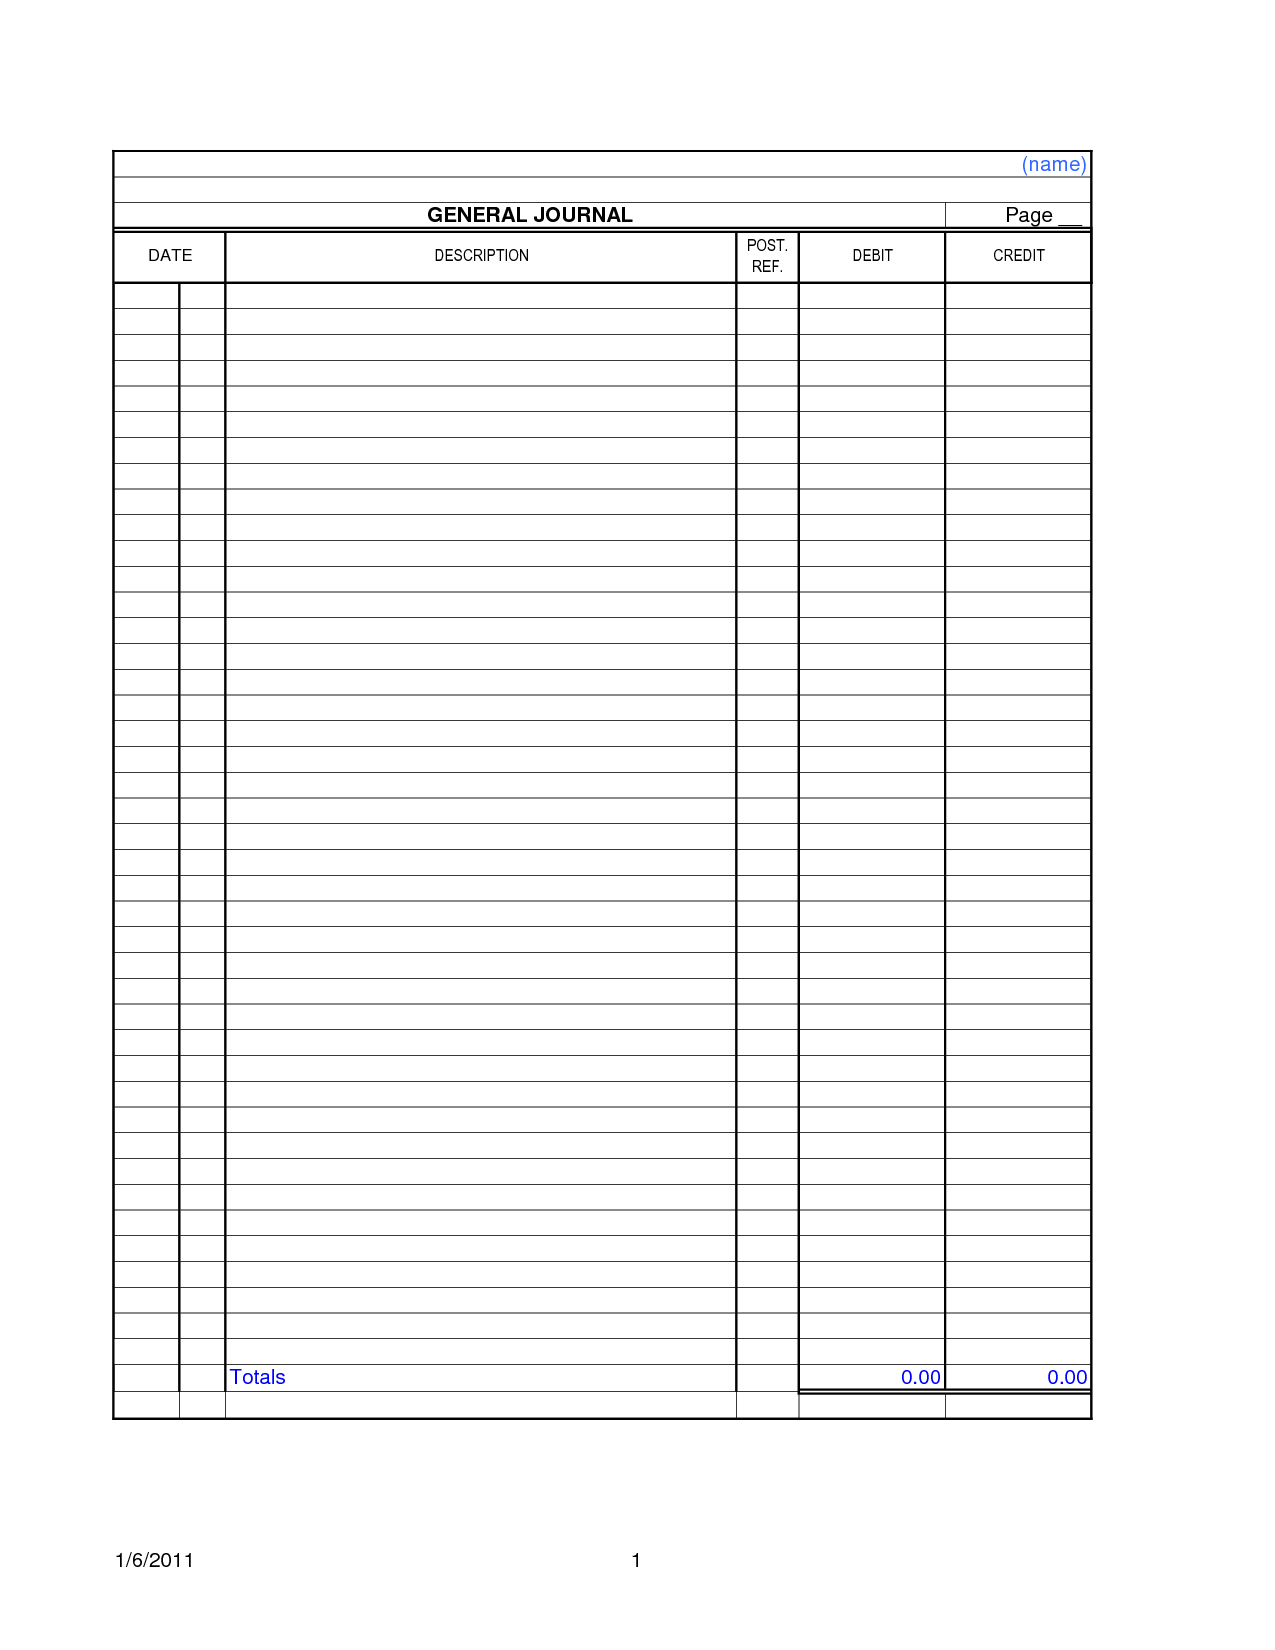 Blank Accounting Ledger Template Printable | Money Tips Throughout Blank Ledger Template